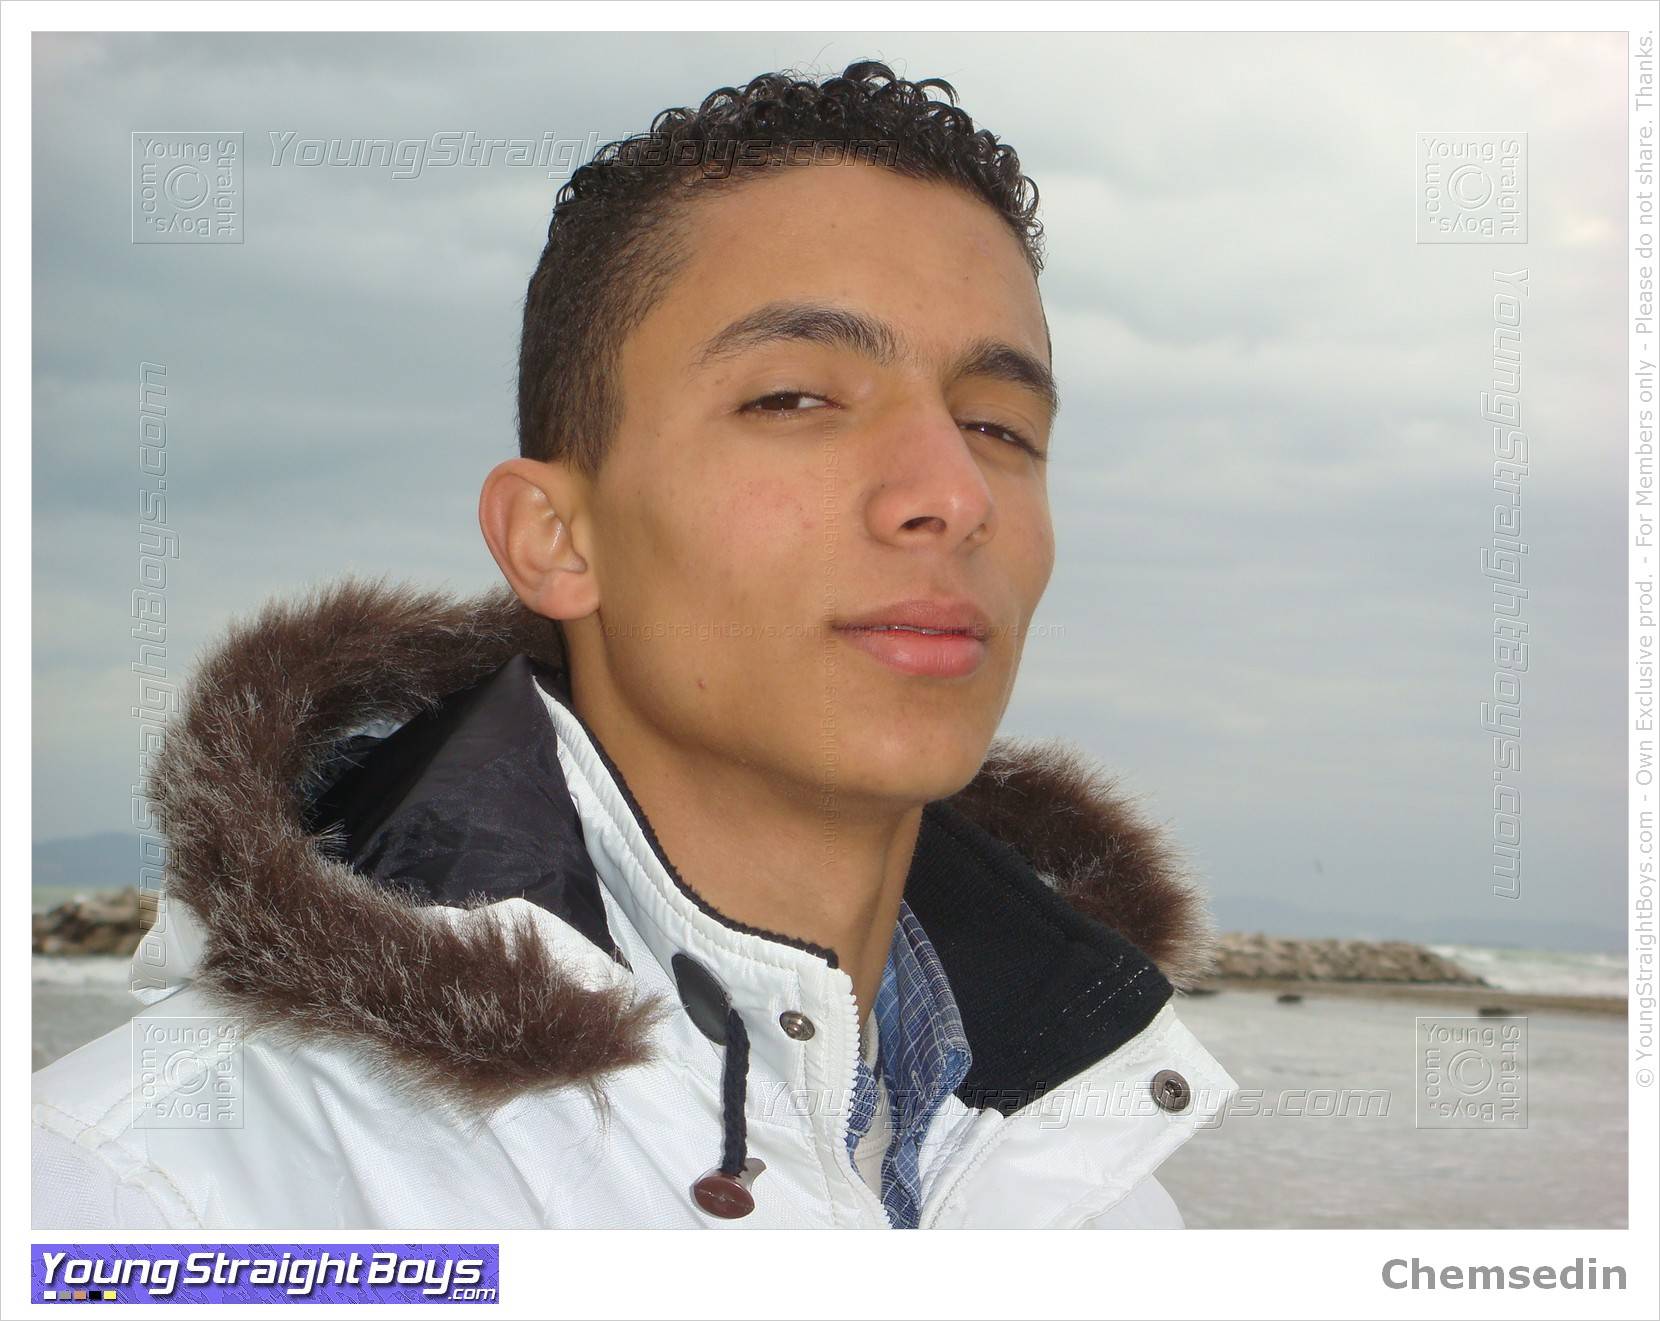 Chemsedin at the beach, a handsome str8 young Arabian boy that I could suck :-)